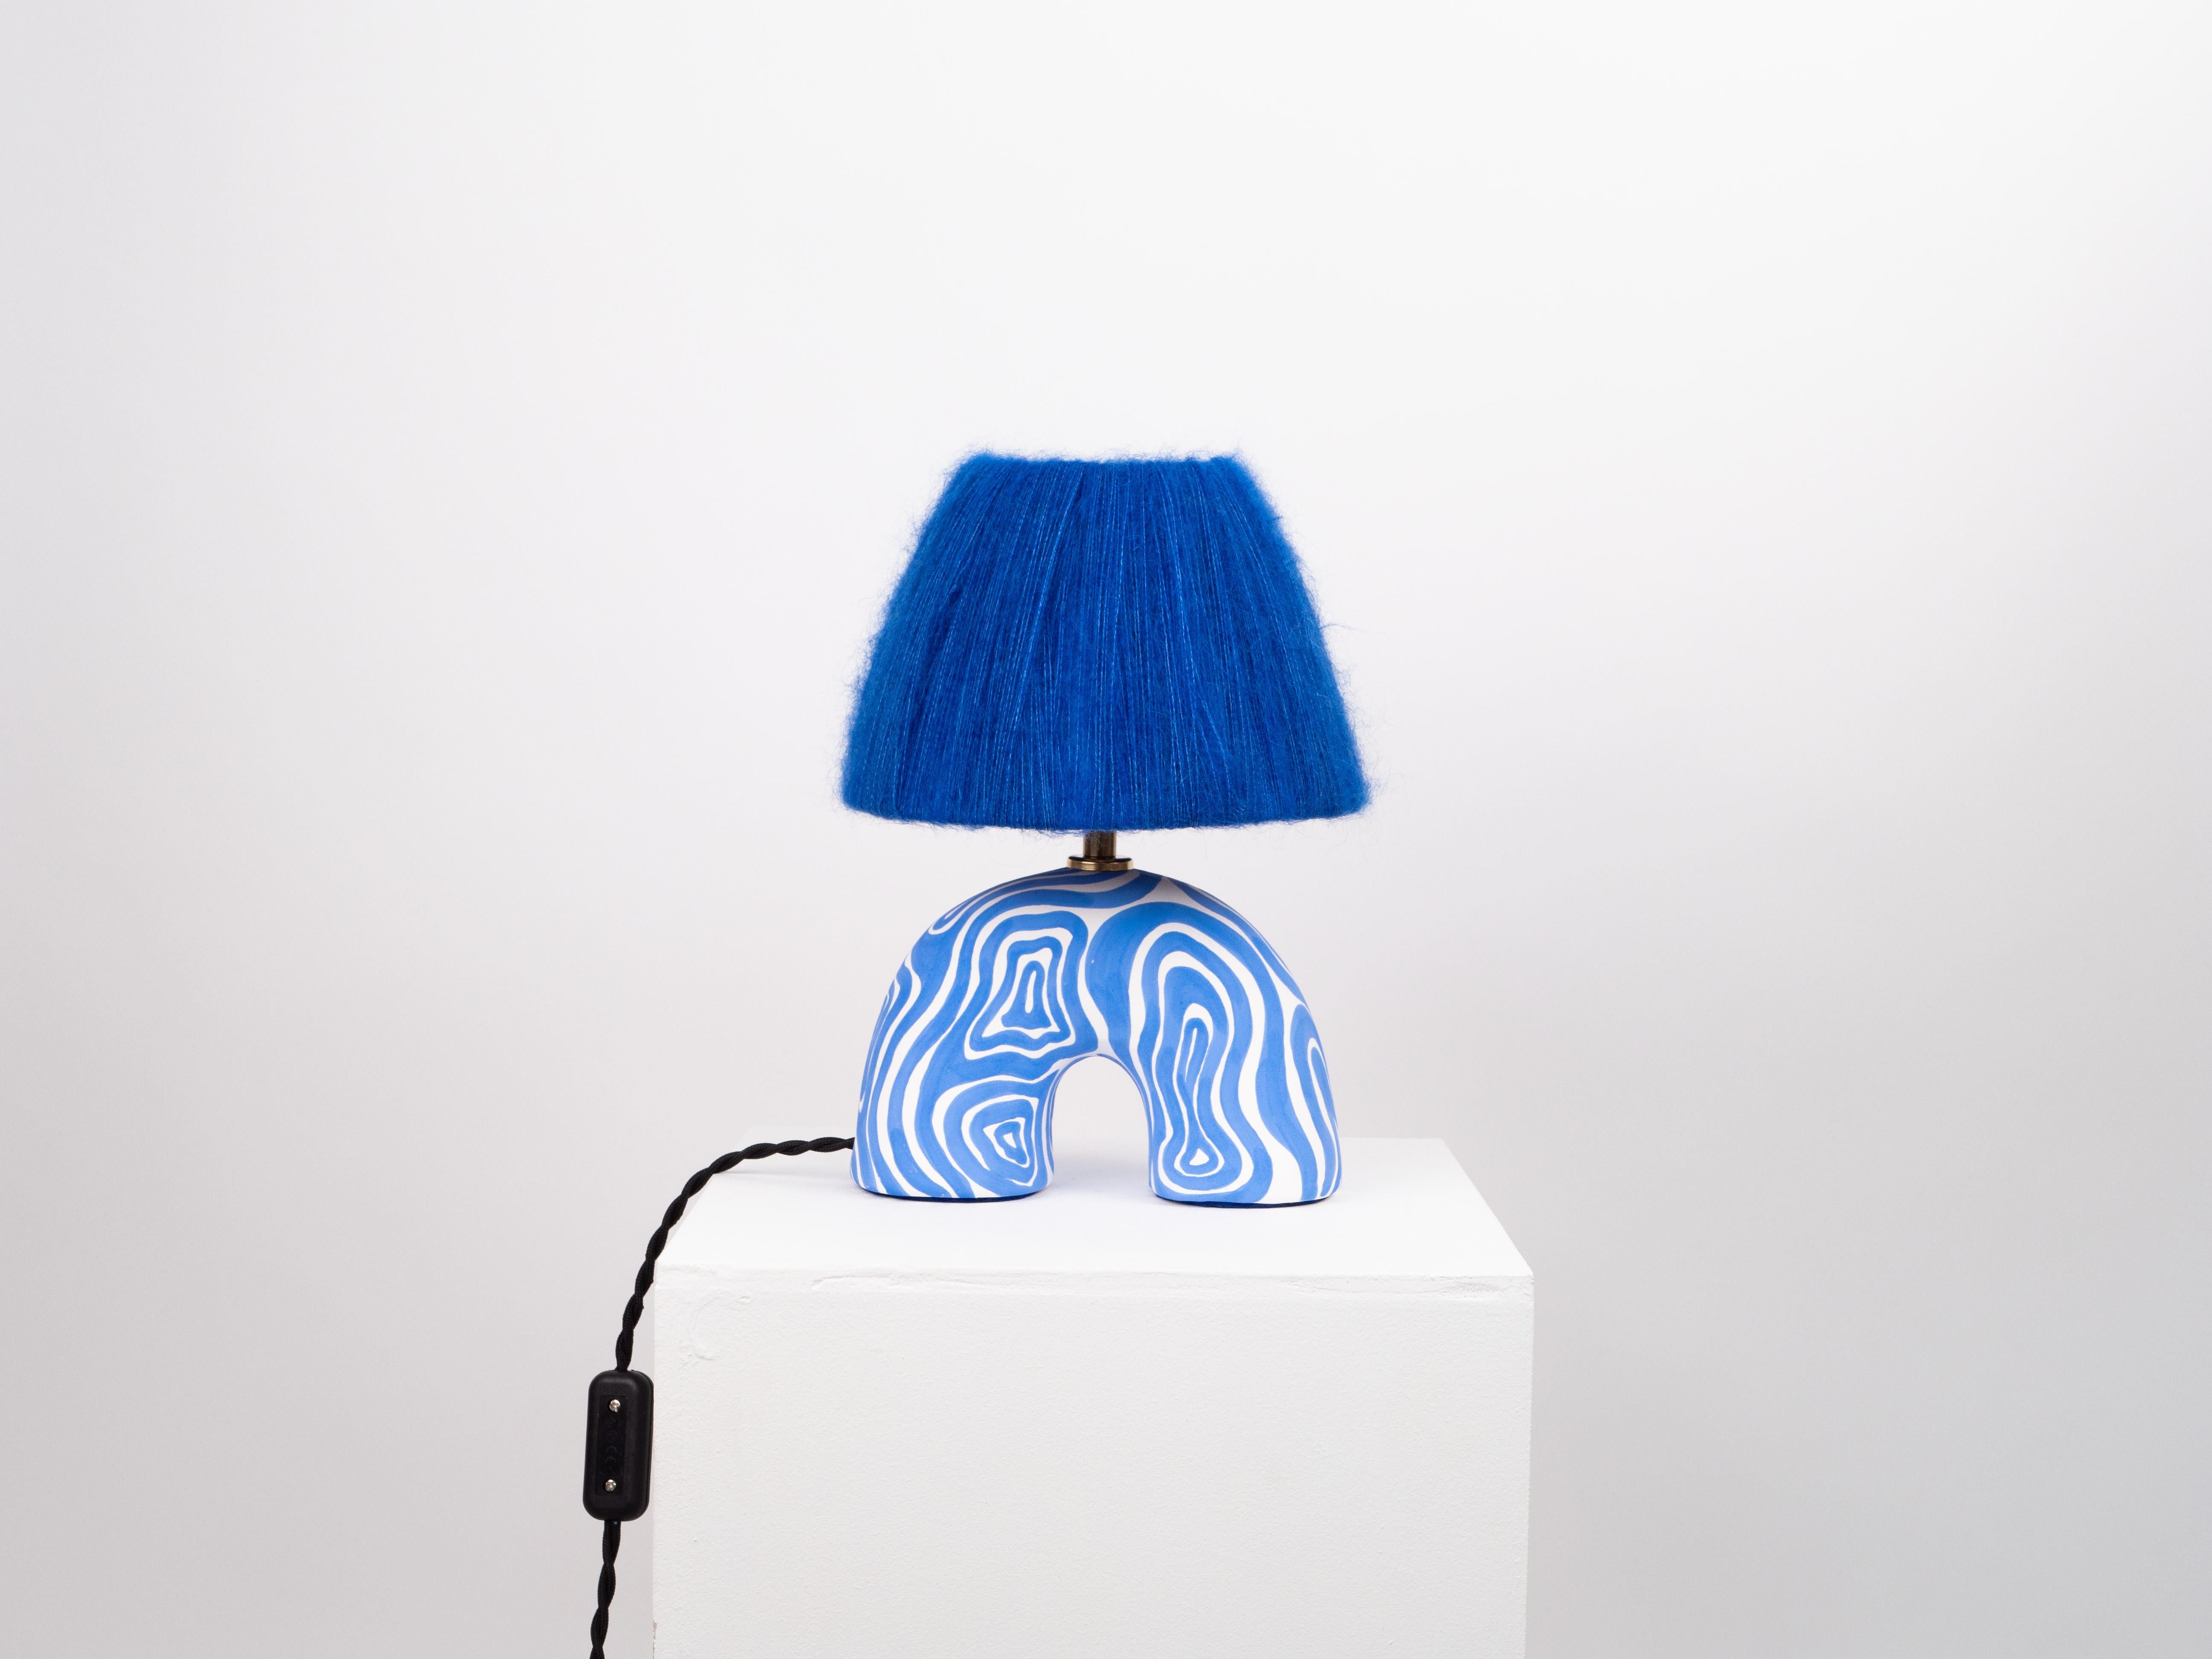 White and blue wave pattern with a matte finish and blue mohair shade 

Estimated processing time is 2 weeks from order confirmation

Pictured with a Mini Globe LED E27 Bulb. Bulb not included

To pair this base with a shade in an alternative colour